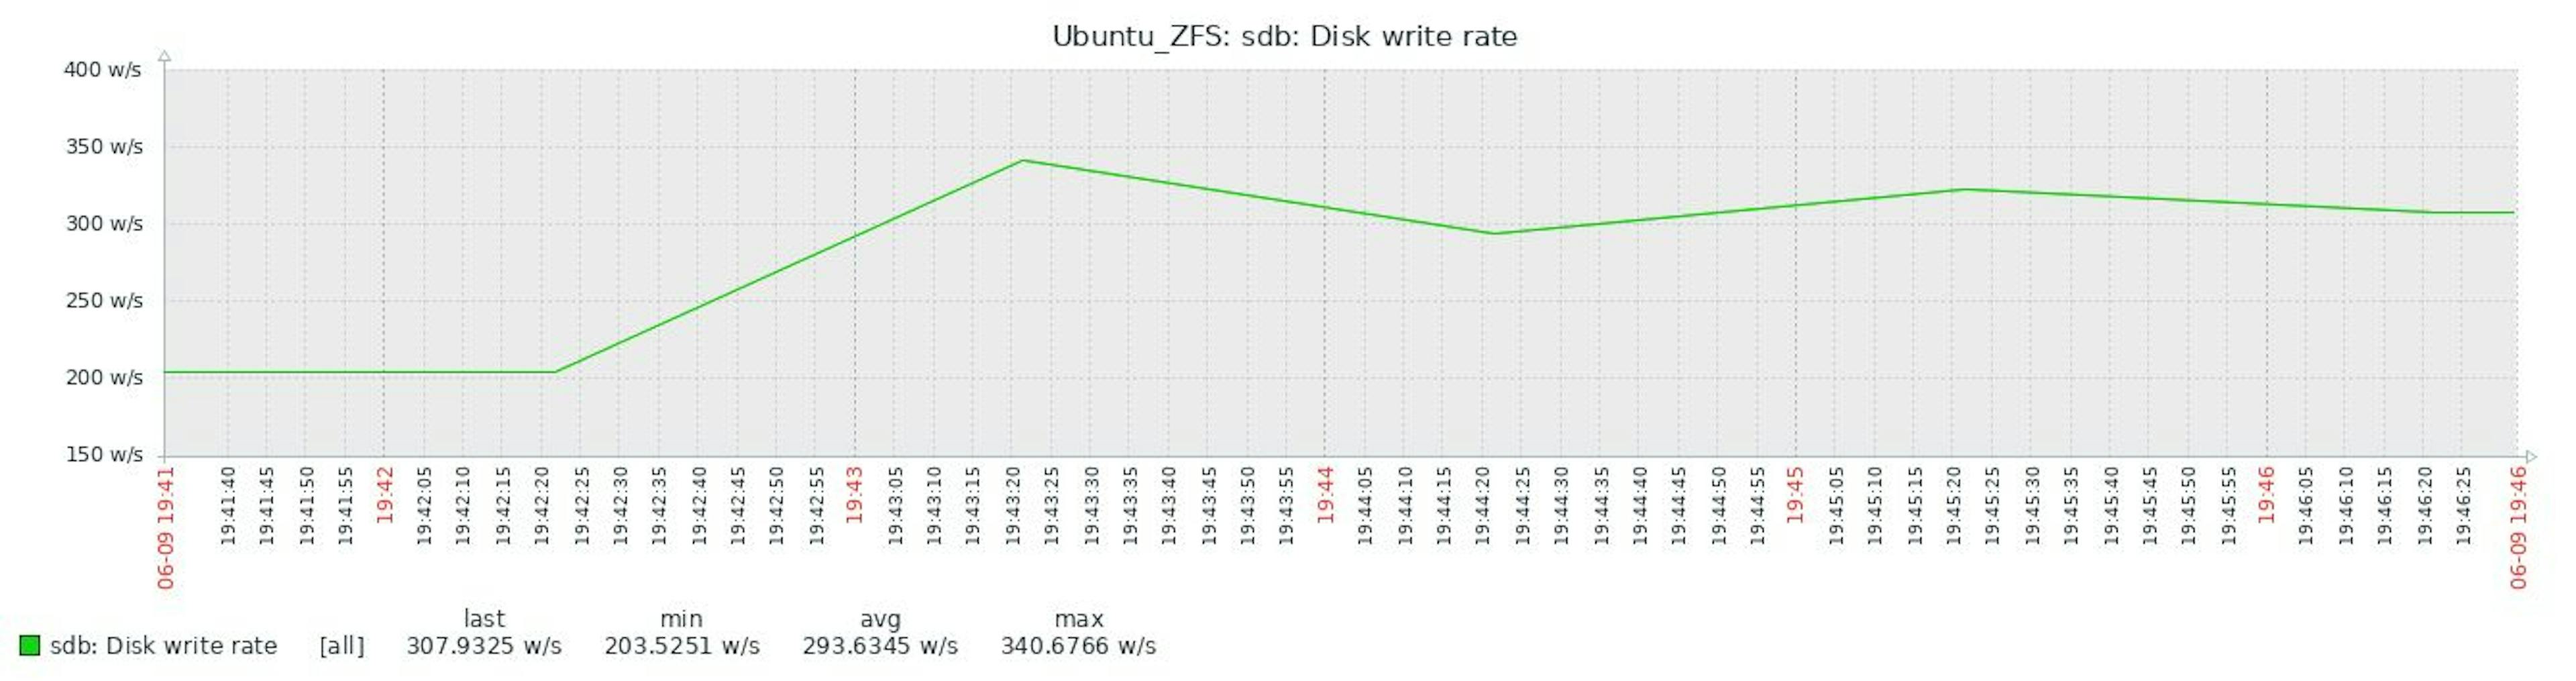 1.5.2.1 ZFS sdb disk write rate